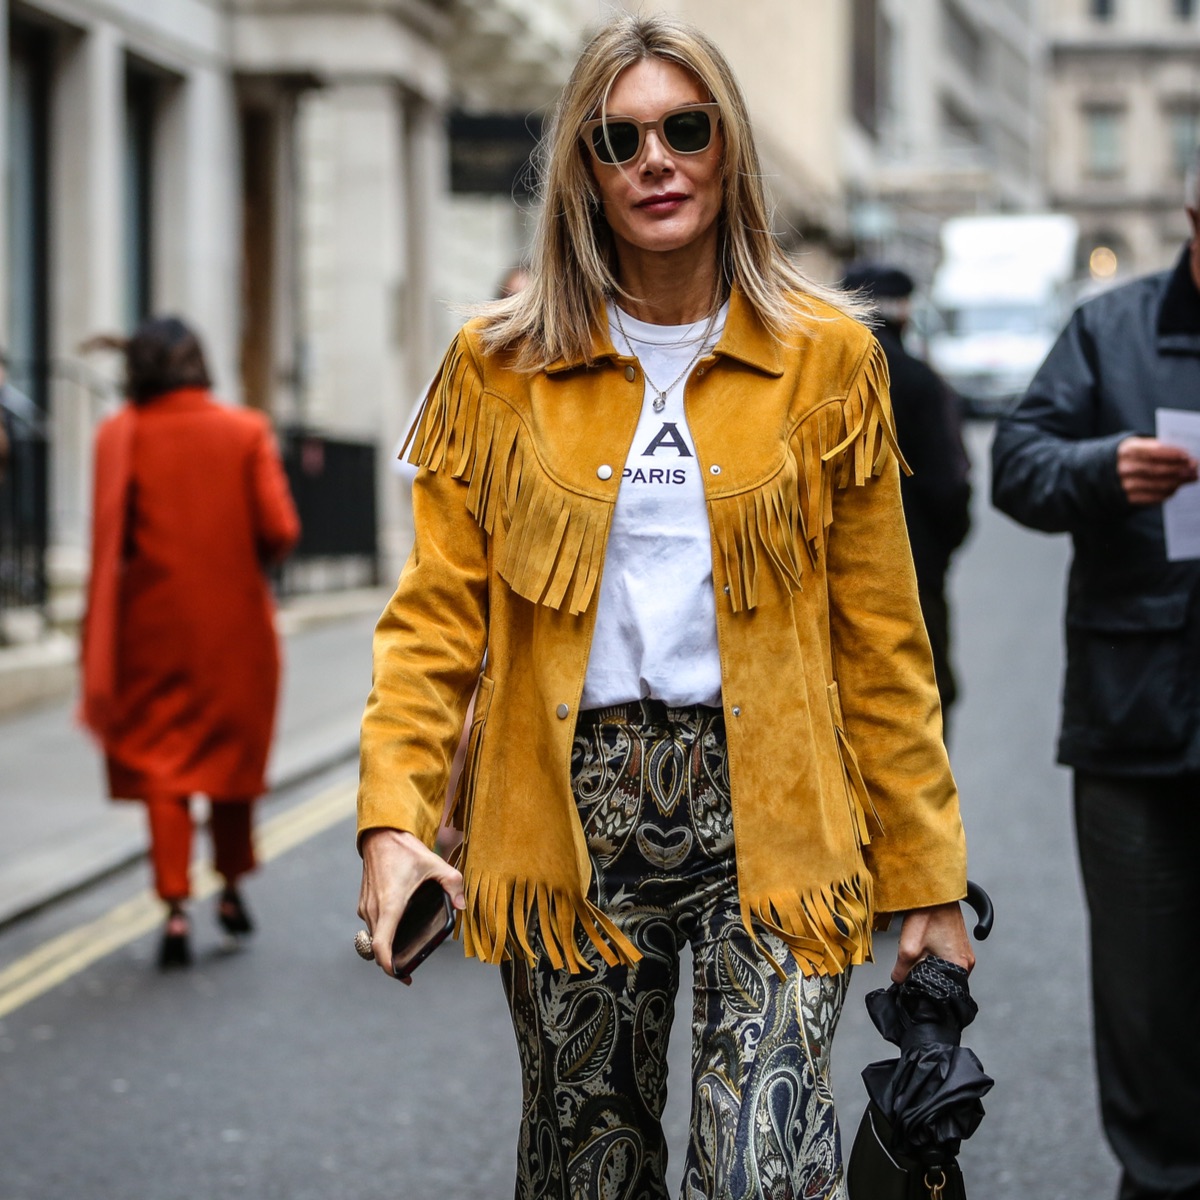 Why you need a fringe jacket this fall